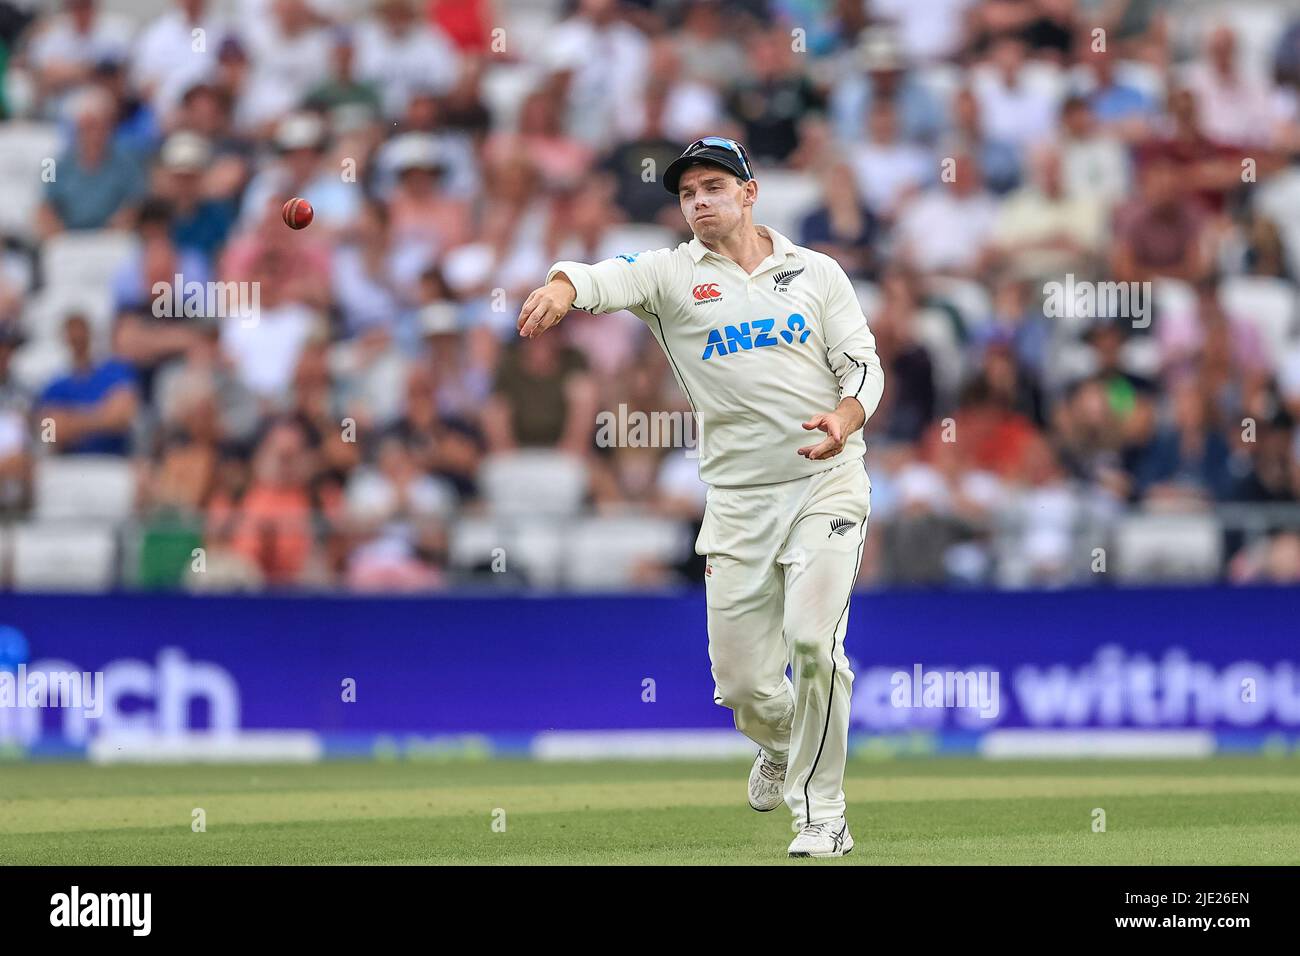 Leeds, UK. 24th June, 2022. Tom Latham of New Zealand in action during the game in Leeds, United Kingdom on 6/24/2022. (Photo by Mark Cosgrove/News Images/Sipa USA) Credit: Sipa USA/Alamy Live News Stock Photo